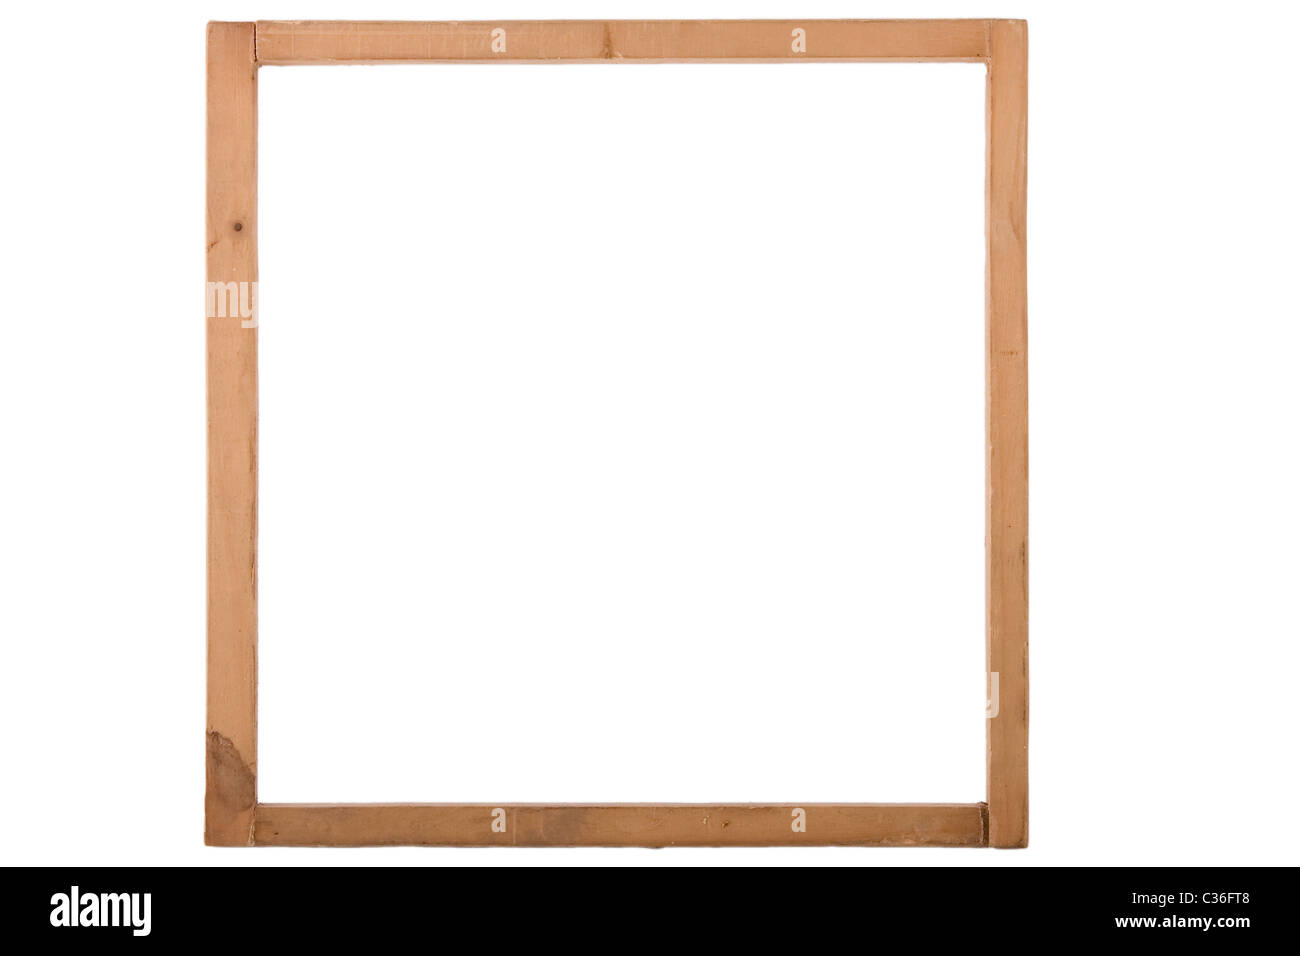 Wood Frame Square Background Stock Photo by ©DanFLCreativo 113877816